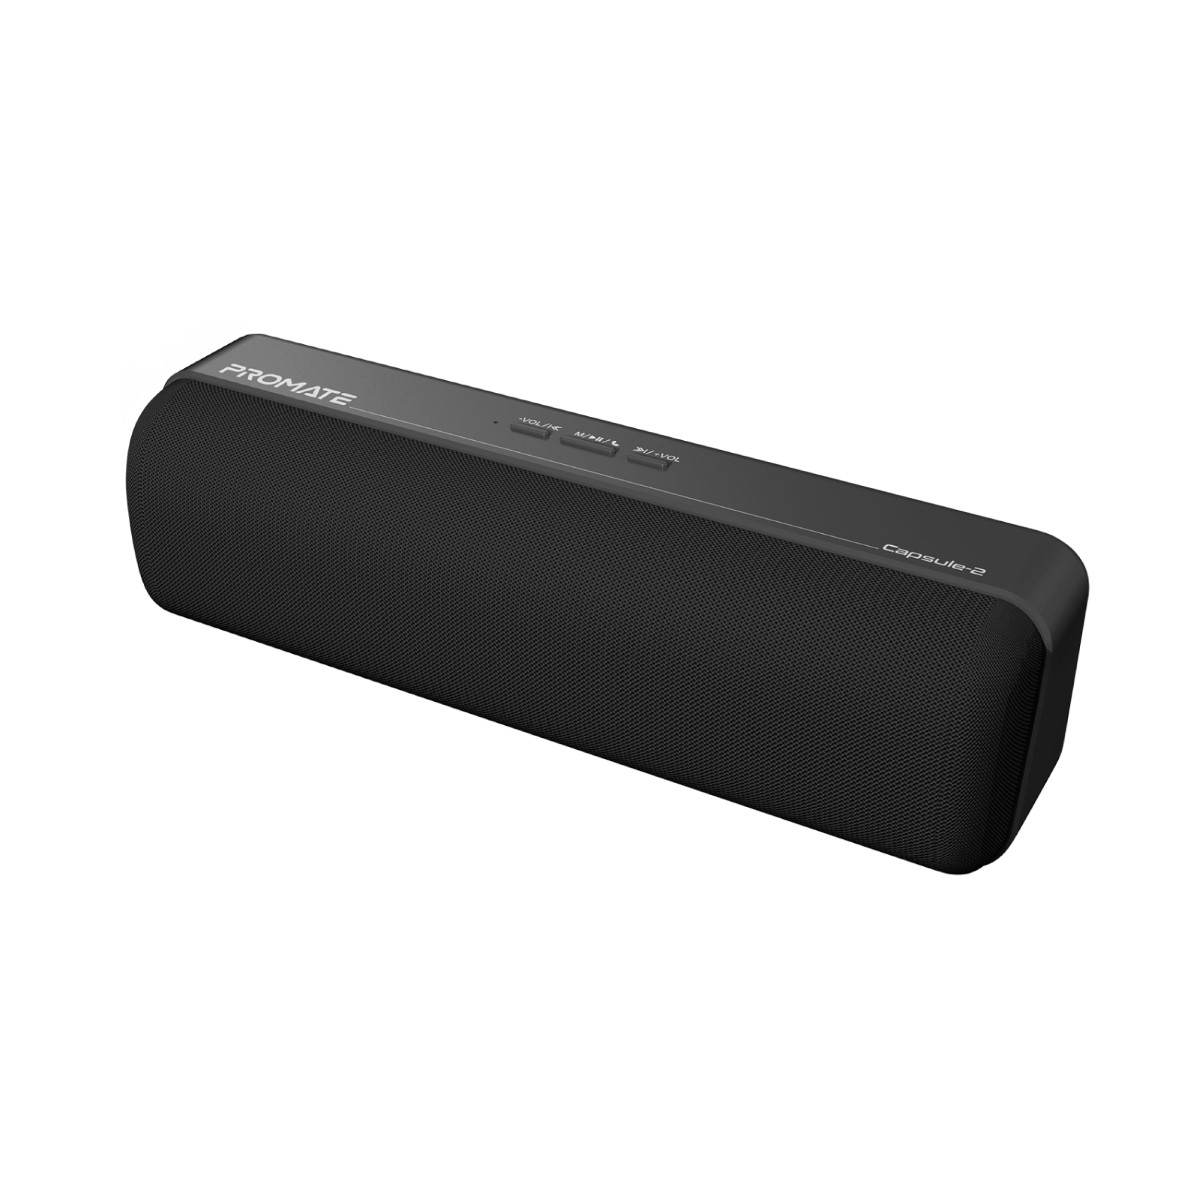 Promate Bluetooth Speaker, Portable HD 6W True Wireless Speaker with Bluetooth 5.0, Long Playtime, USB Media Port, Micro SD Card Slot and 3.5mm Port for iPhone 13, iPad Air, iPod, Capsule-2.BLACK